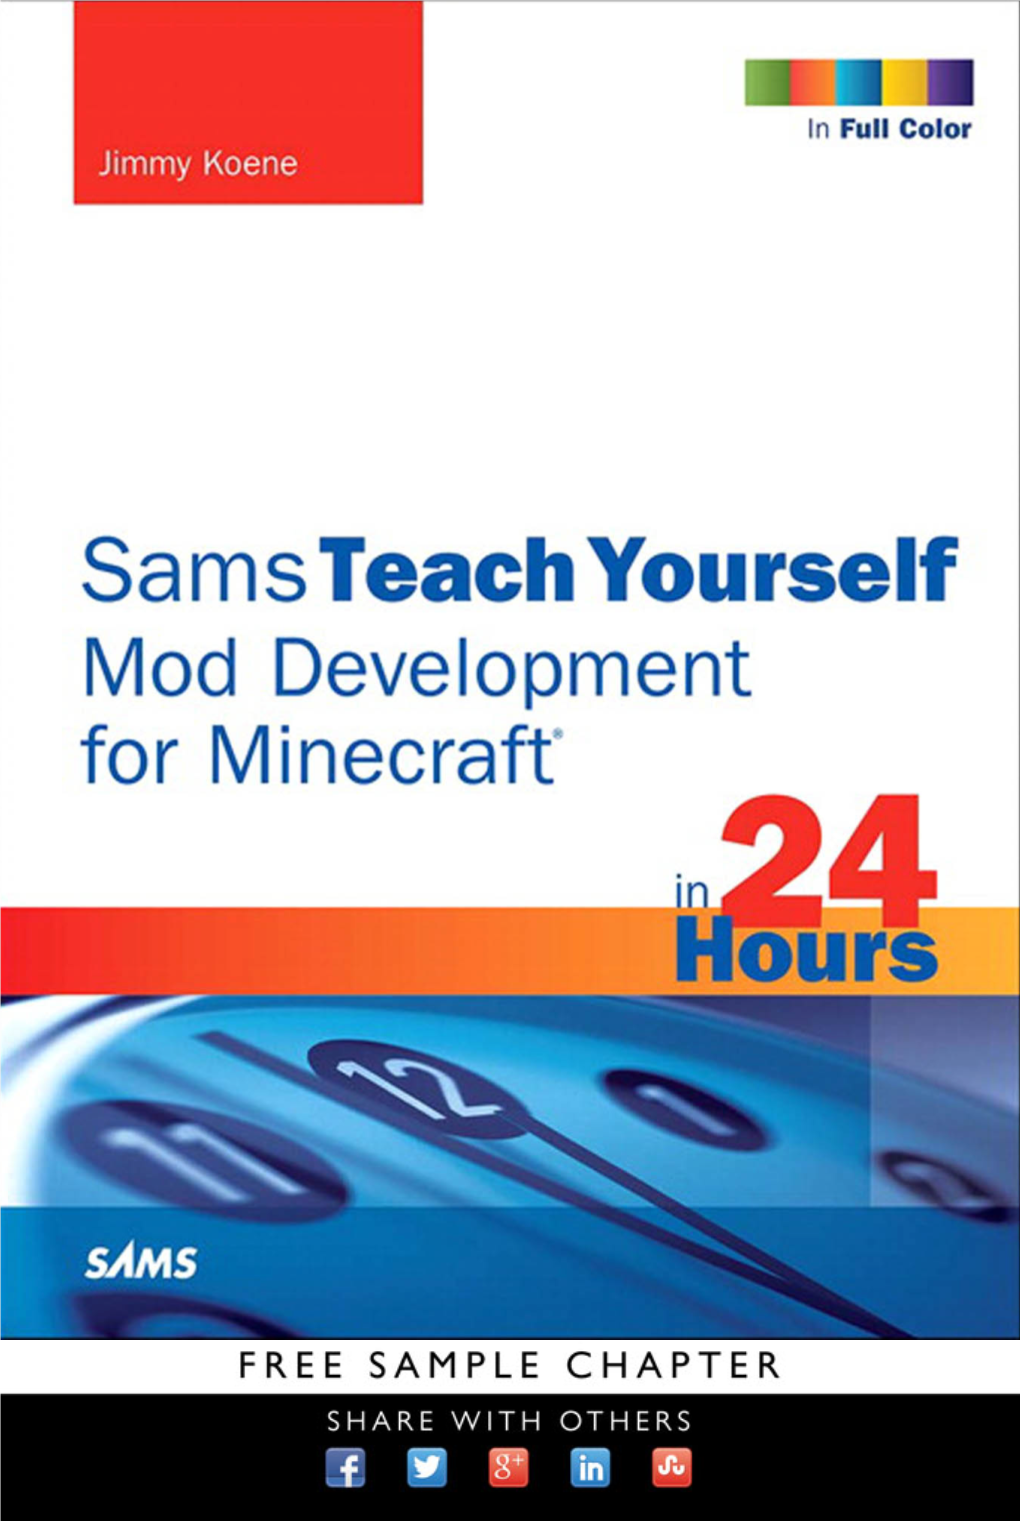 Sams Teach Yourself Mod Development for Minecraft® in 24 Hours Editor-In-Chief Copyright © 2015 by Pearson Education, Inc